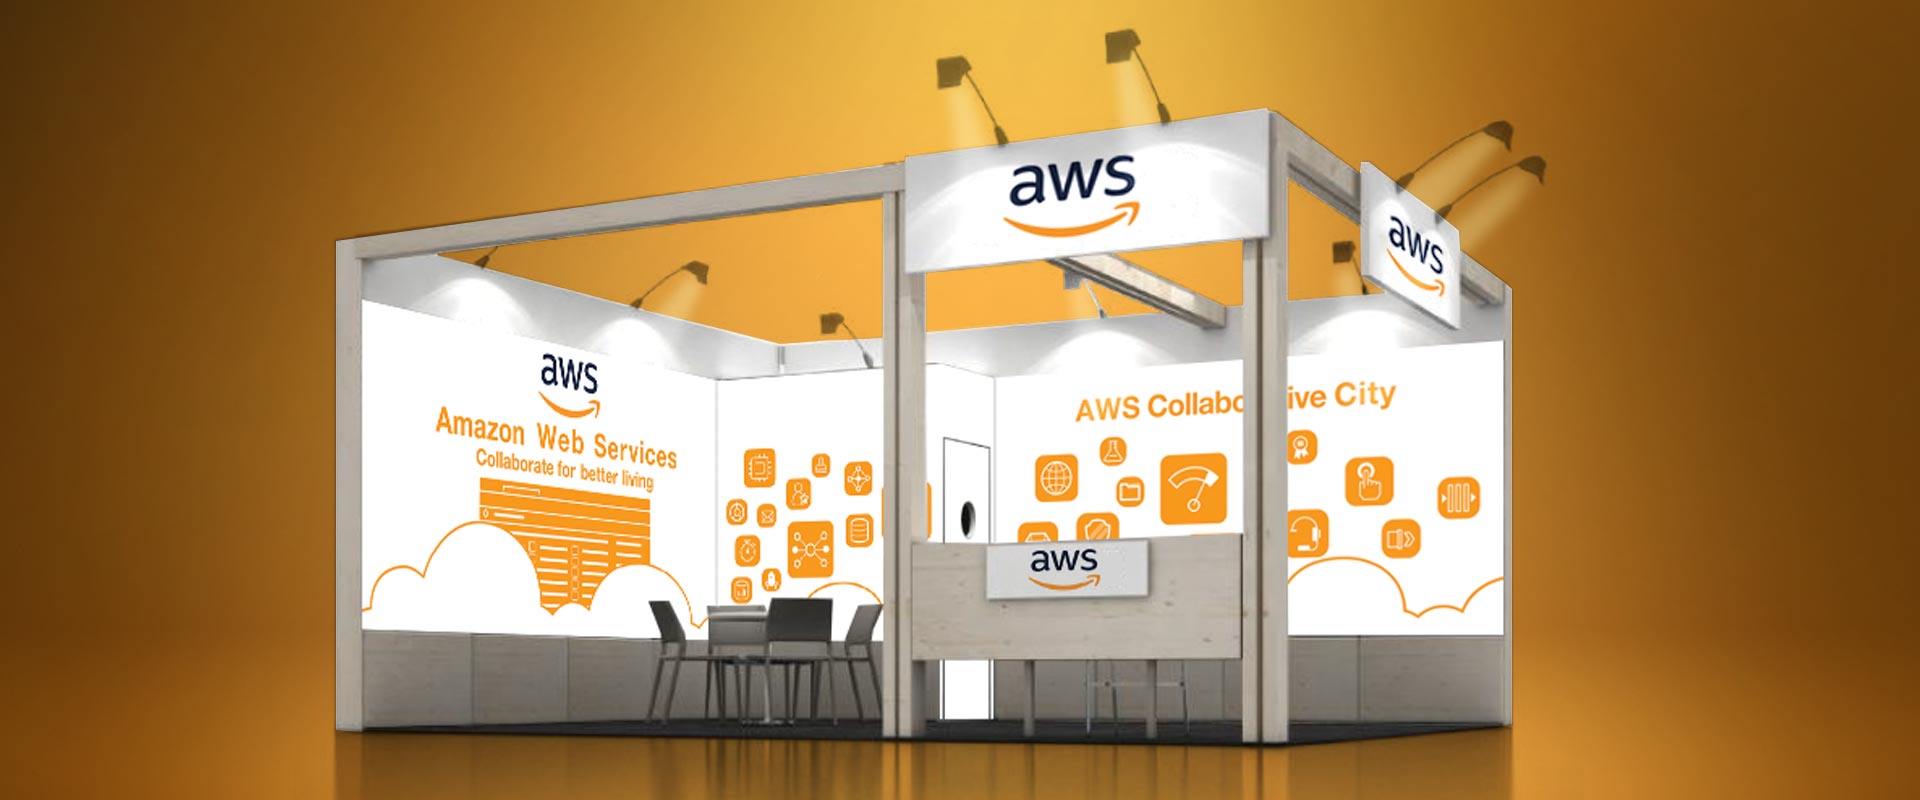 AWS stand public sector event